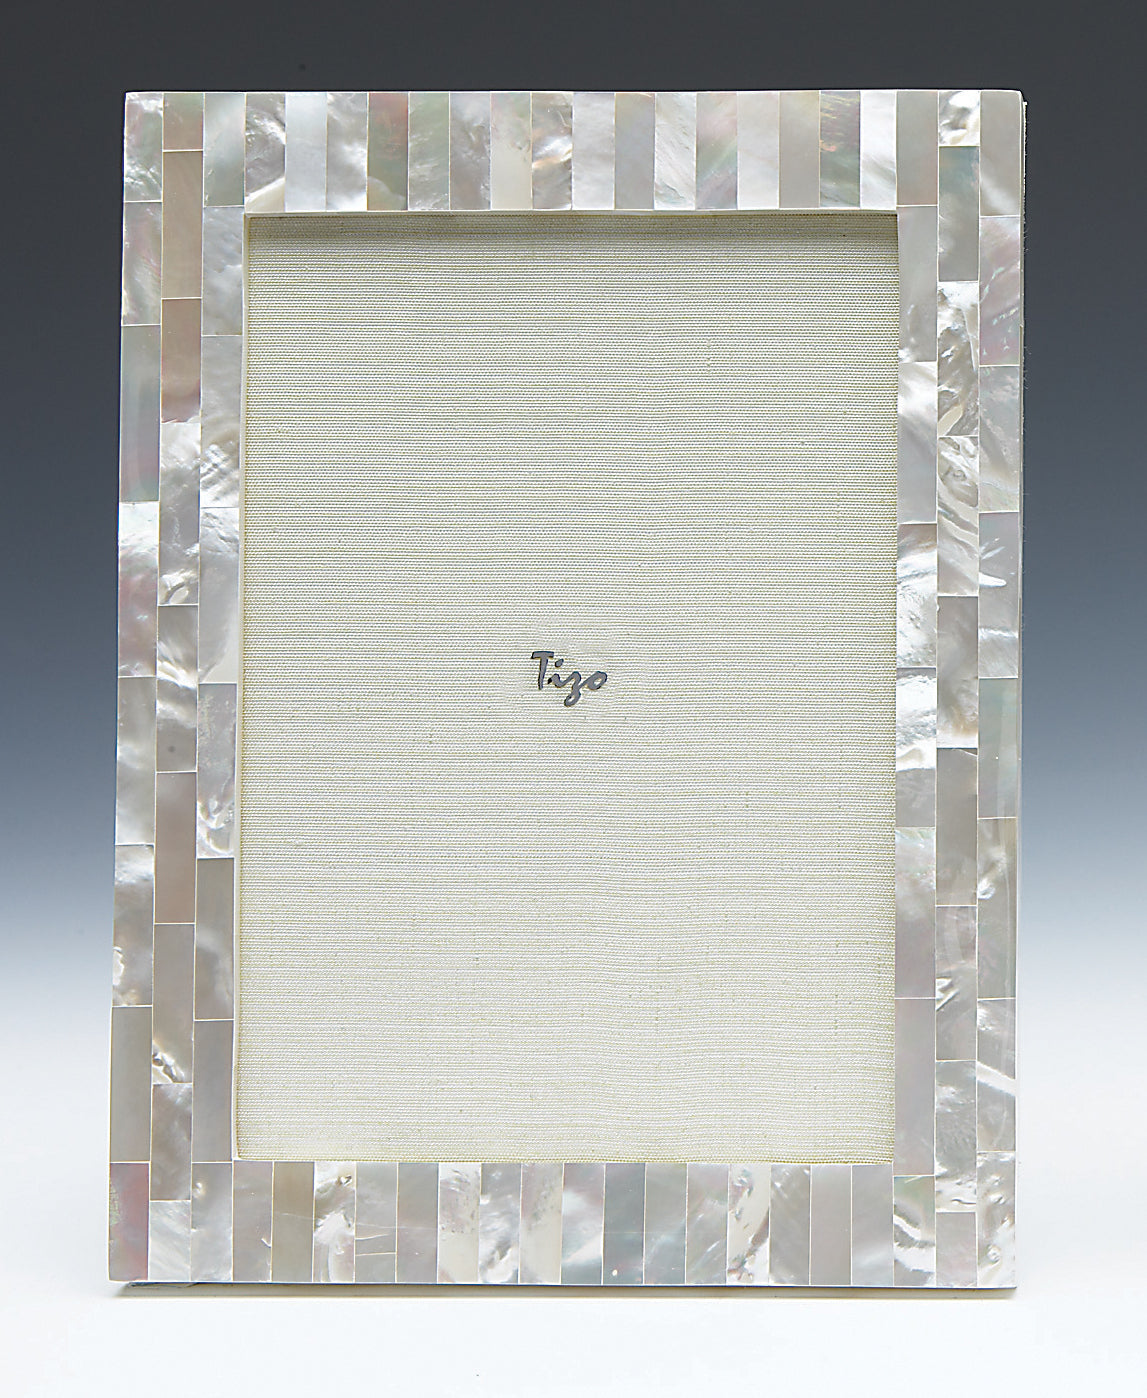 TIZO PICTURE FRAME - WHITE MOTHER-OF-PEARL